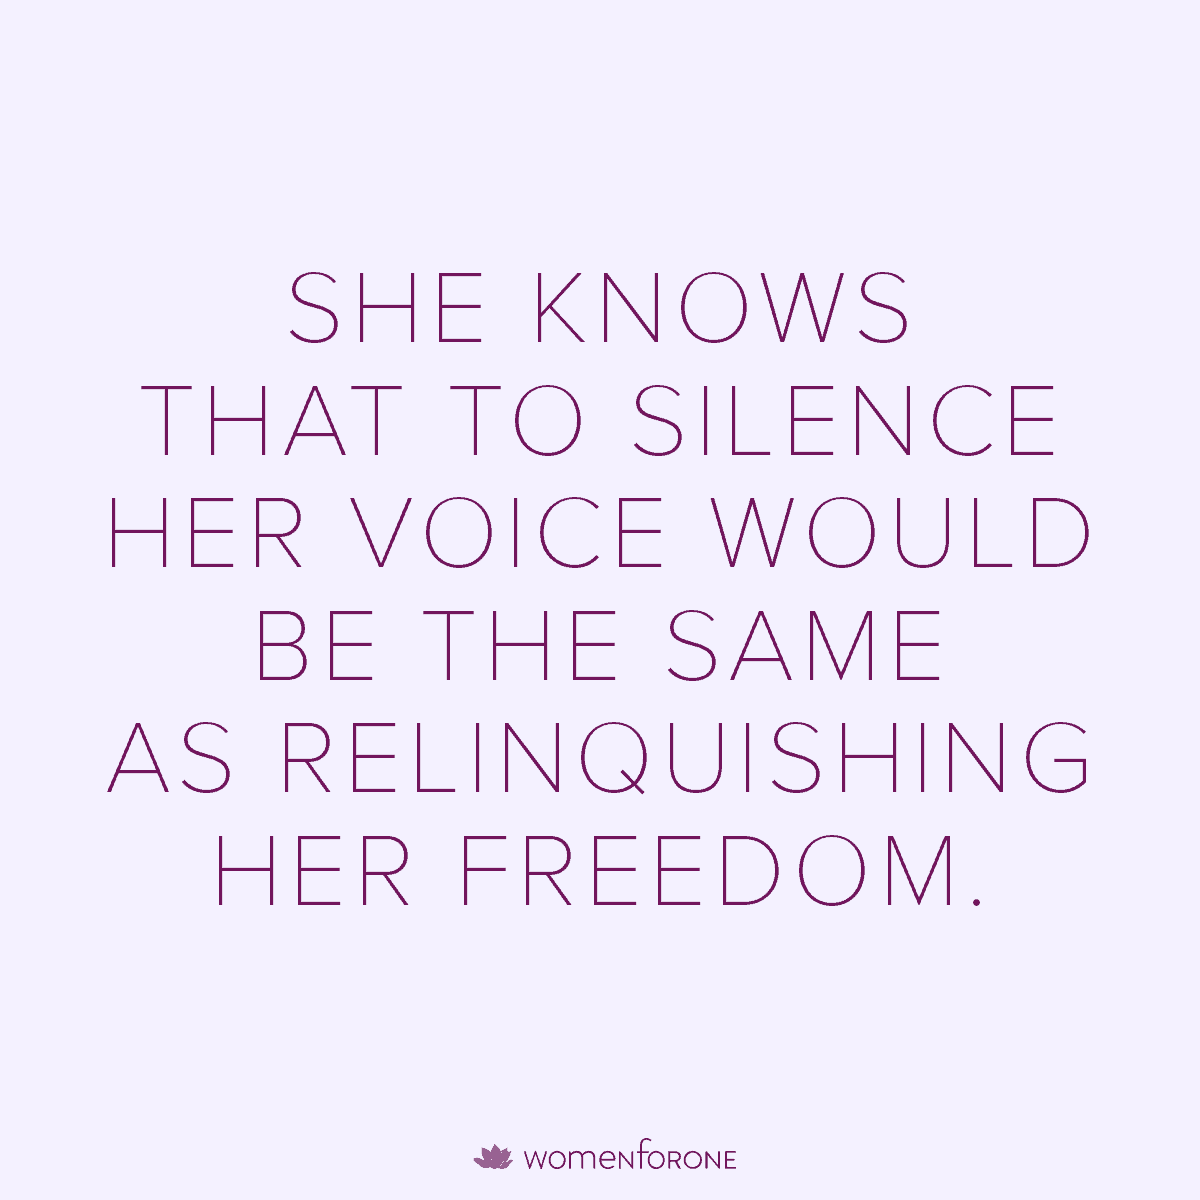 She knows that to silence her voice would be the same as relinquishing her freedom.